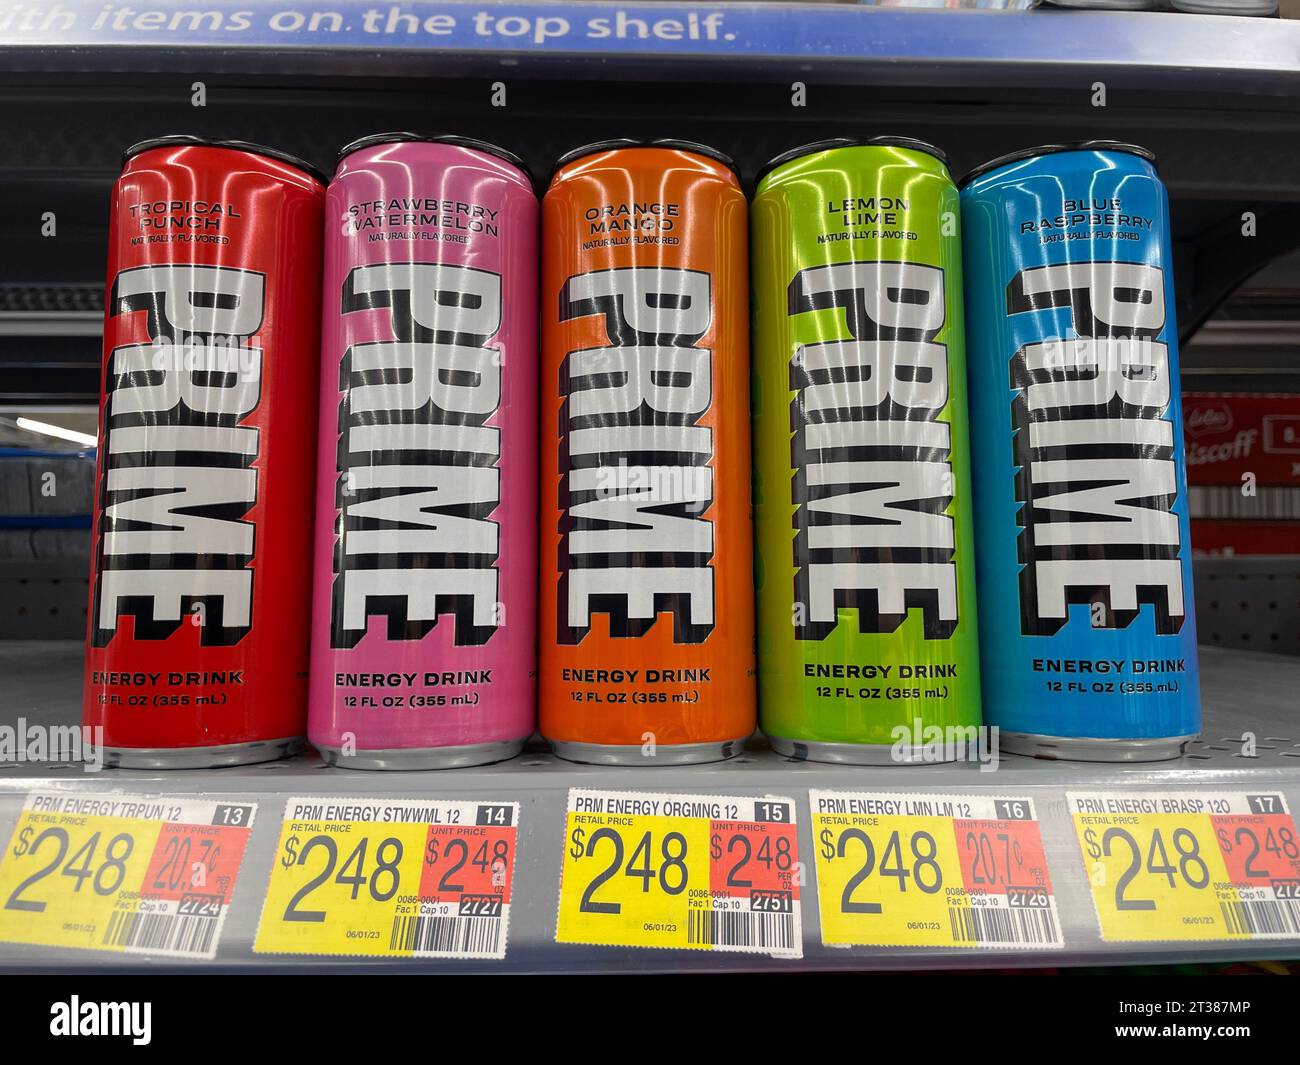 Grovetown, Ga USA - 08 06 23: Walmart grocery store Prime energy drink variety and price Stock Photo